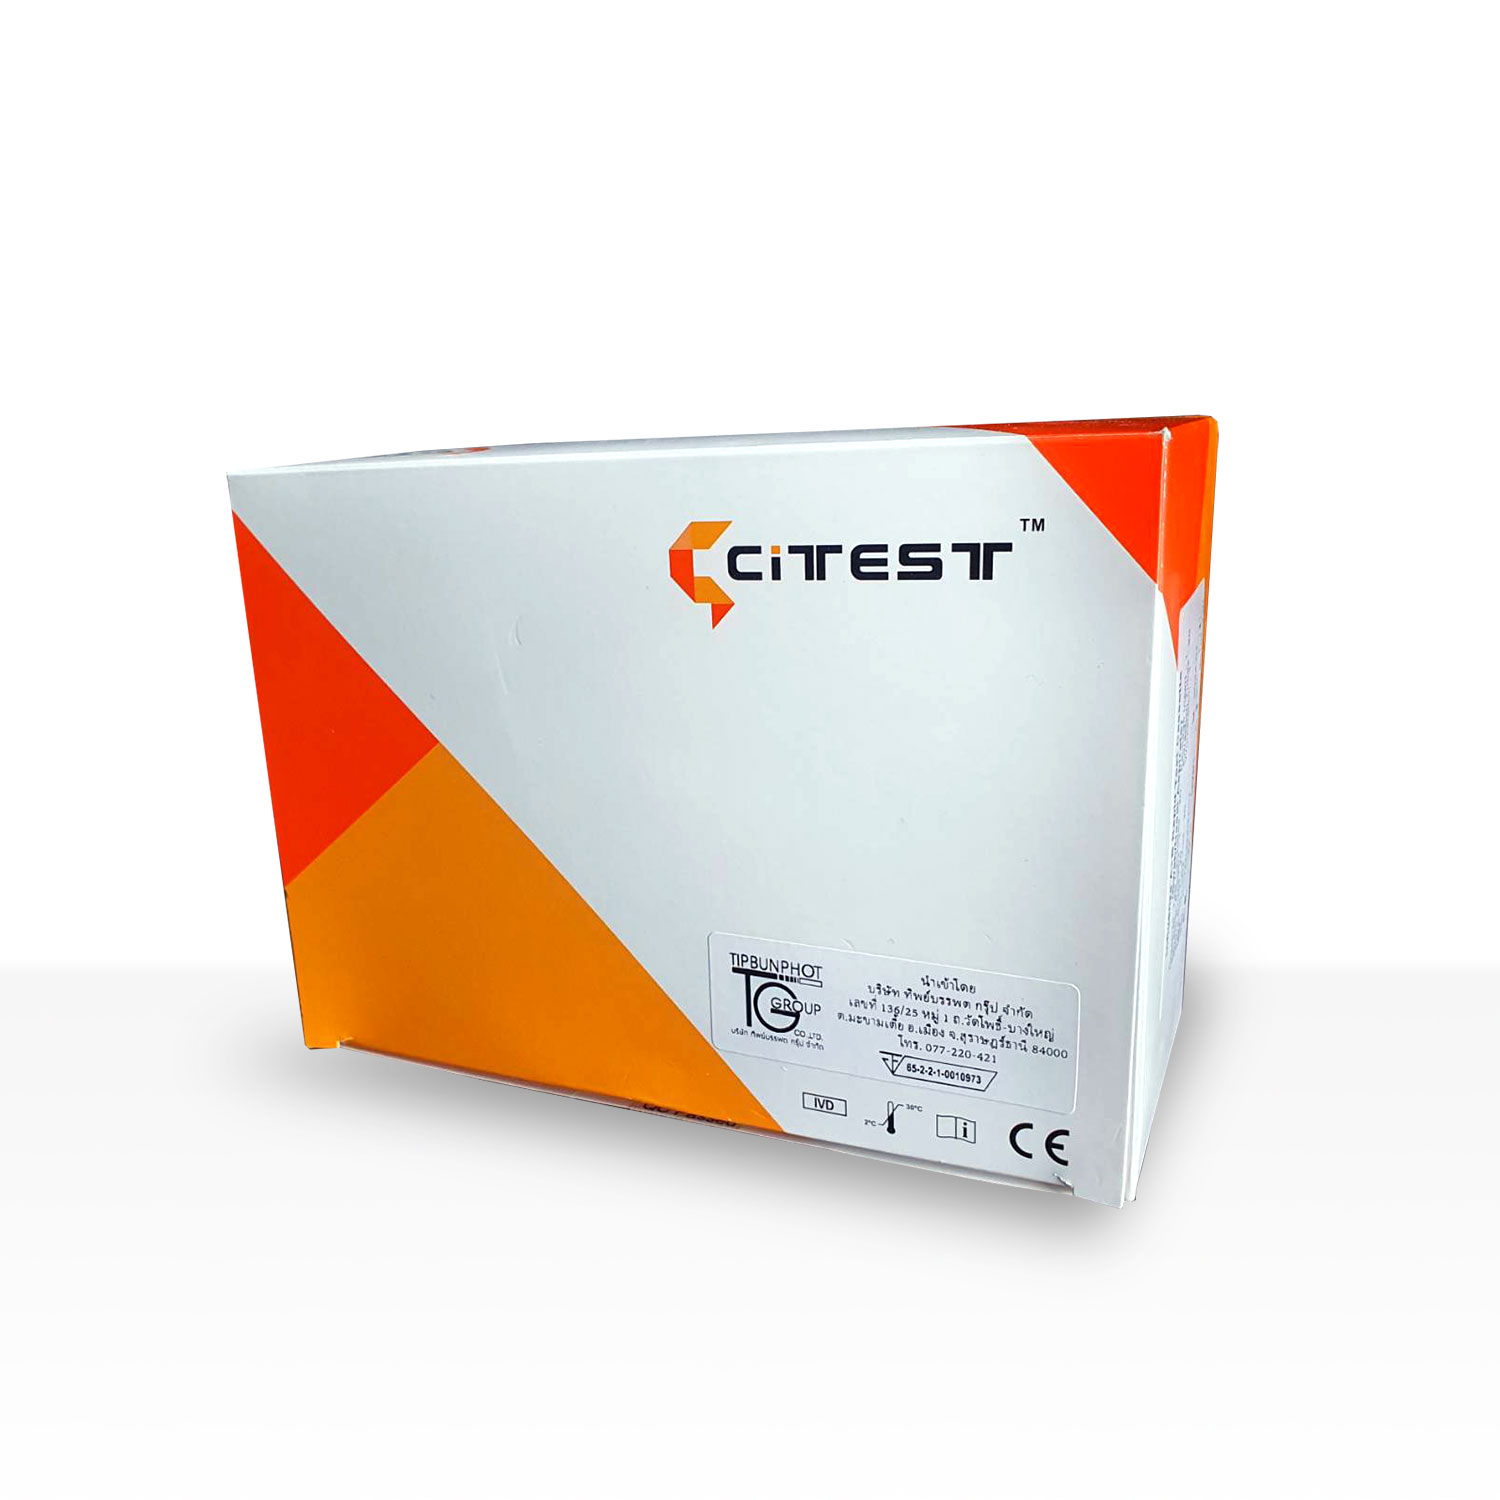 CITEST COVID-19 Ag and influenza A+B Rapid Test (Cassette)